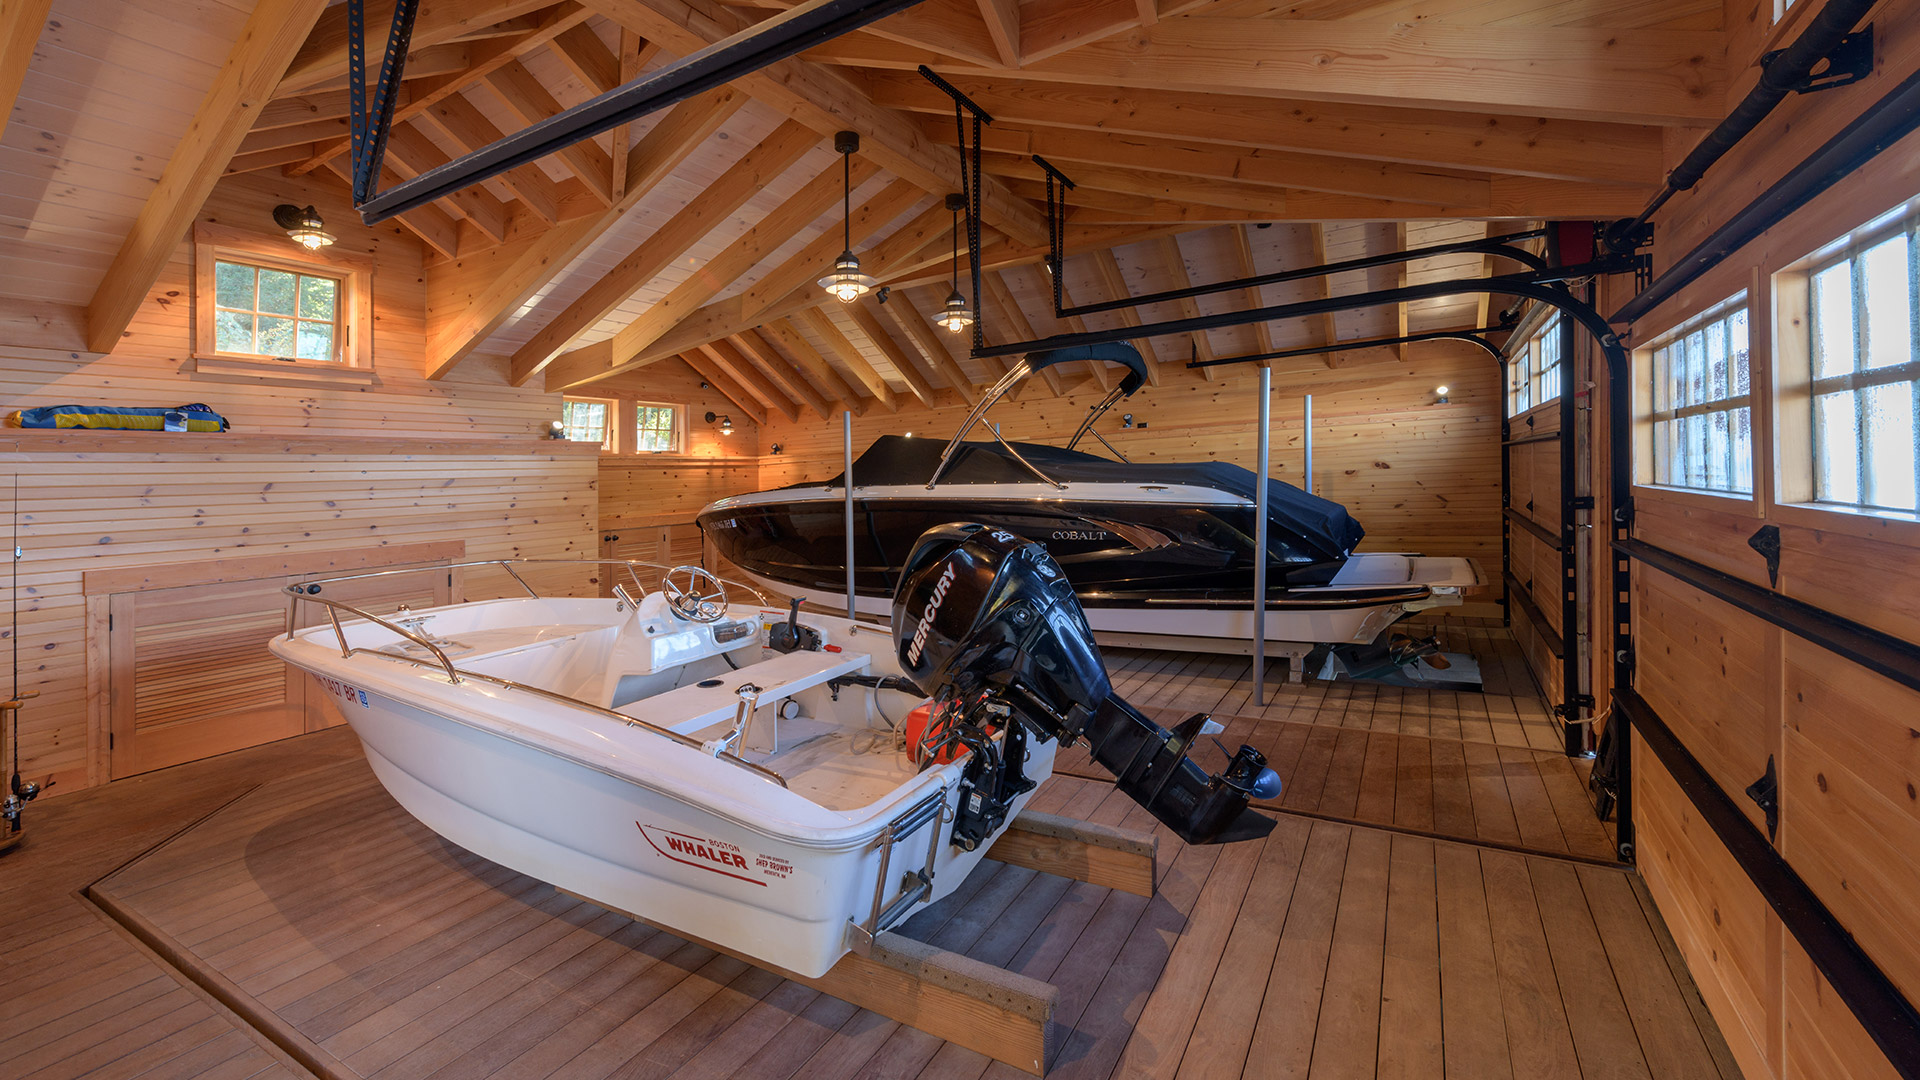 Alton New Hampshire Boathouse interior view of the boathouse with vaulted timber roof and boat lifts.